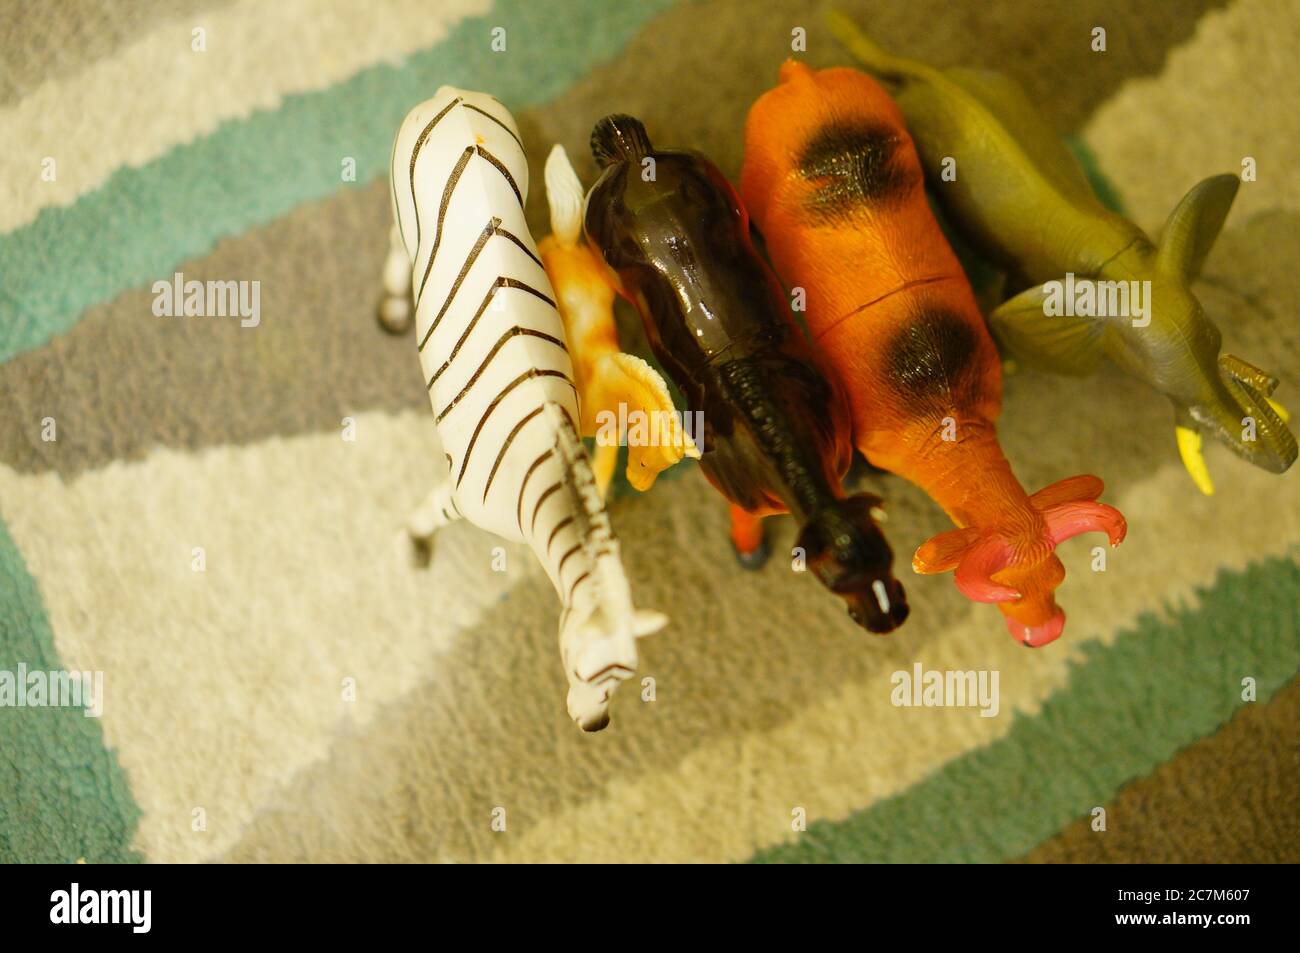 Toys of a zebra, horse, elephant and a bull placed next to each other Stock Photo